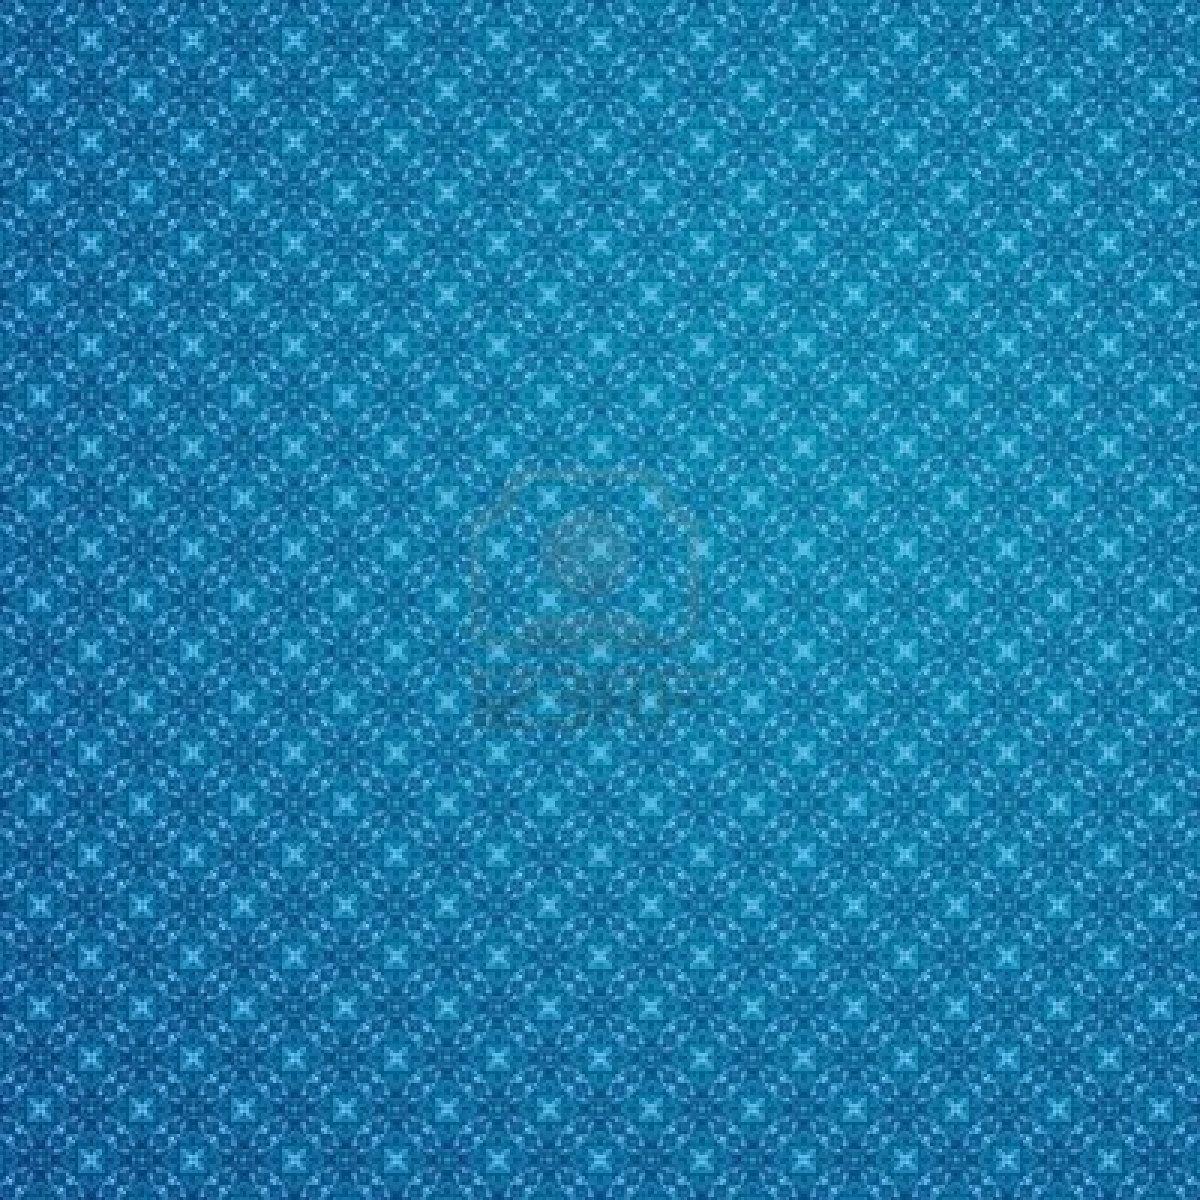 An Image Of A Blue Vintage Wallpaper Backgrounds Royalty Free Stock